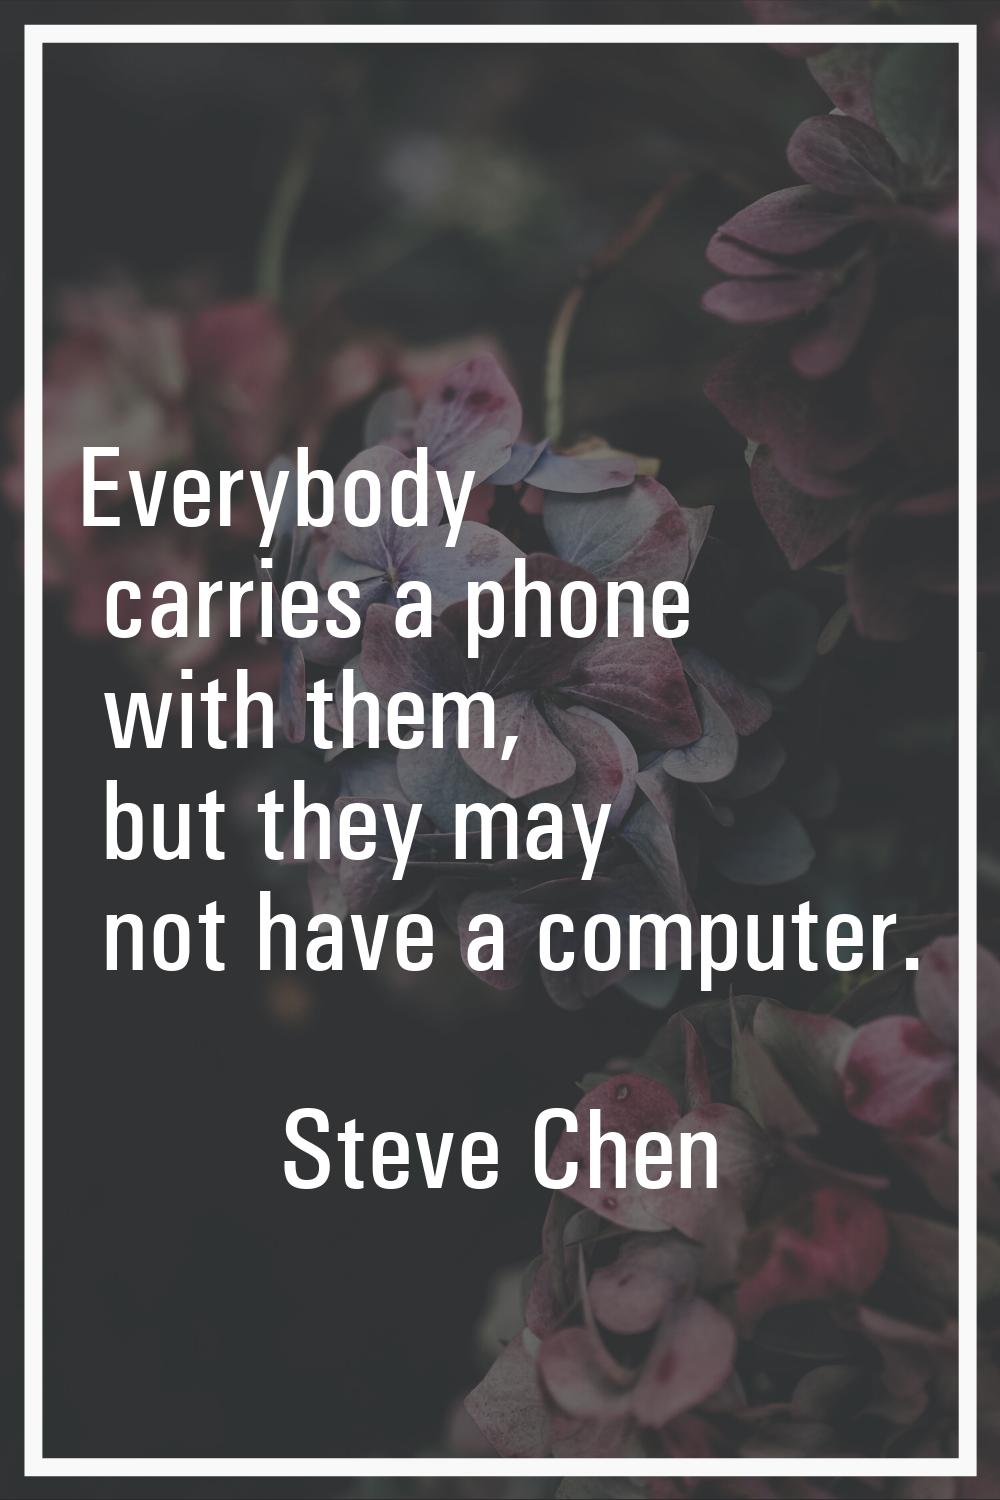 Everybody carries a phone with them, but they may not have a computer.